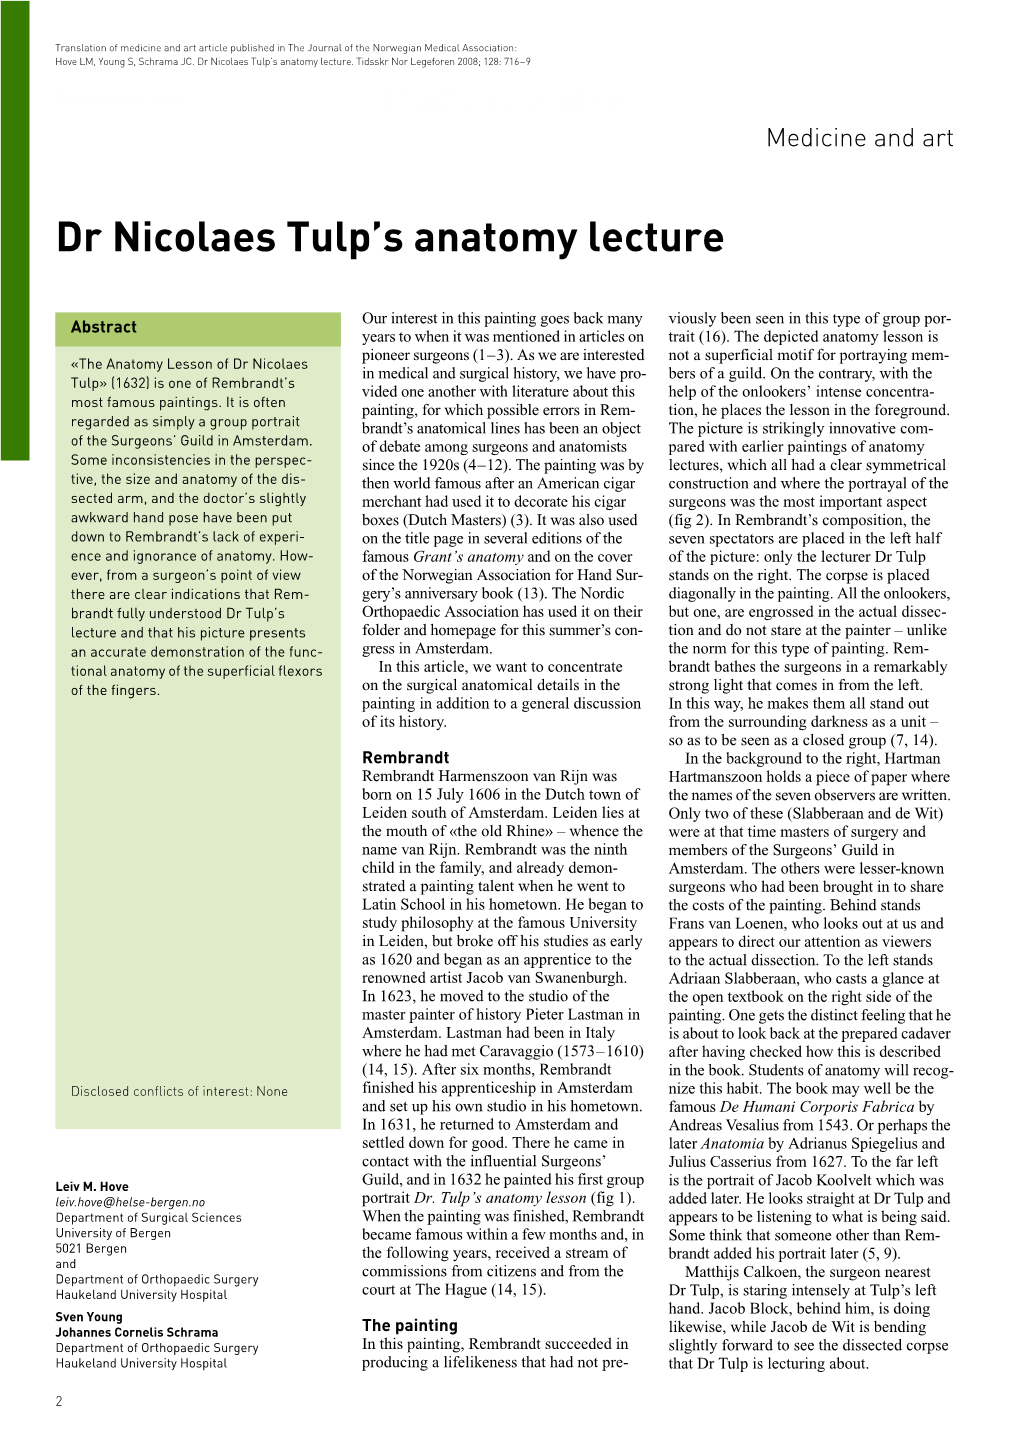 Dr Nicolaes Tulp's Anatomy Lecture